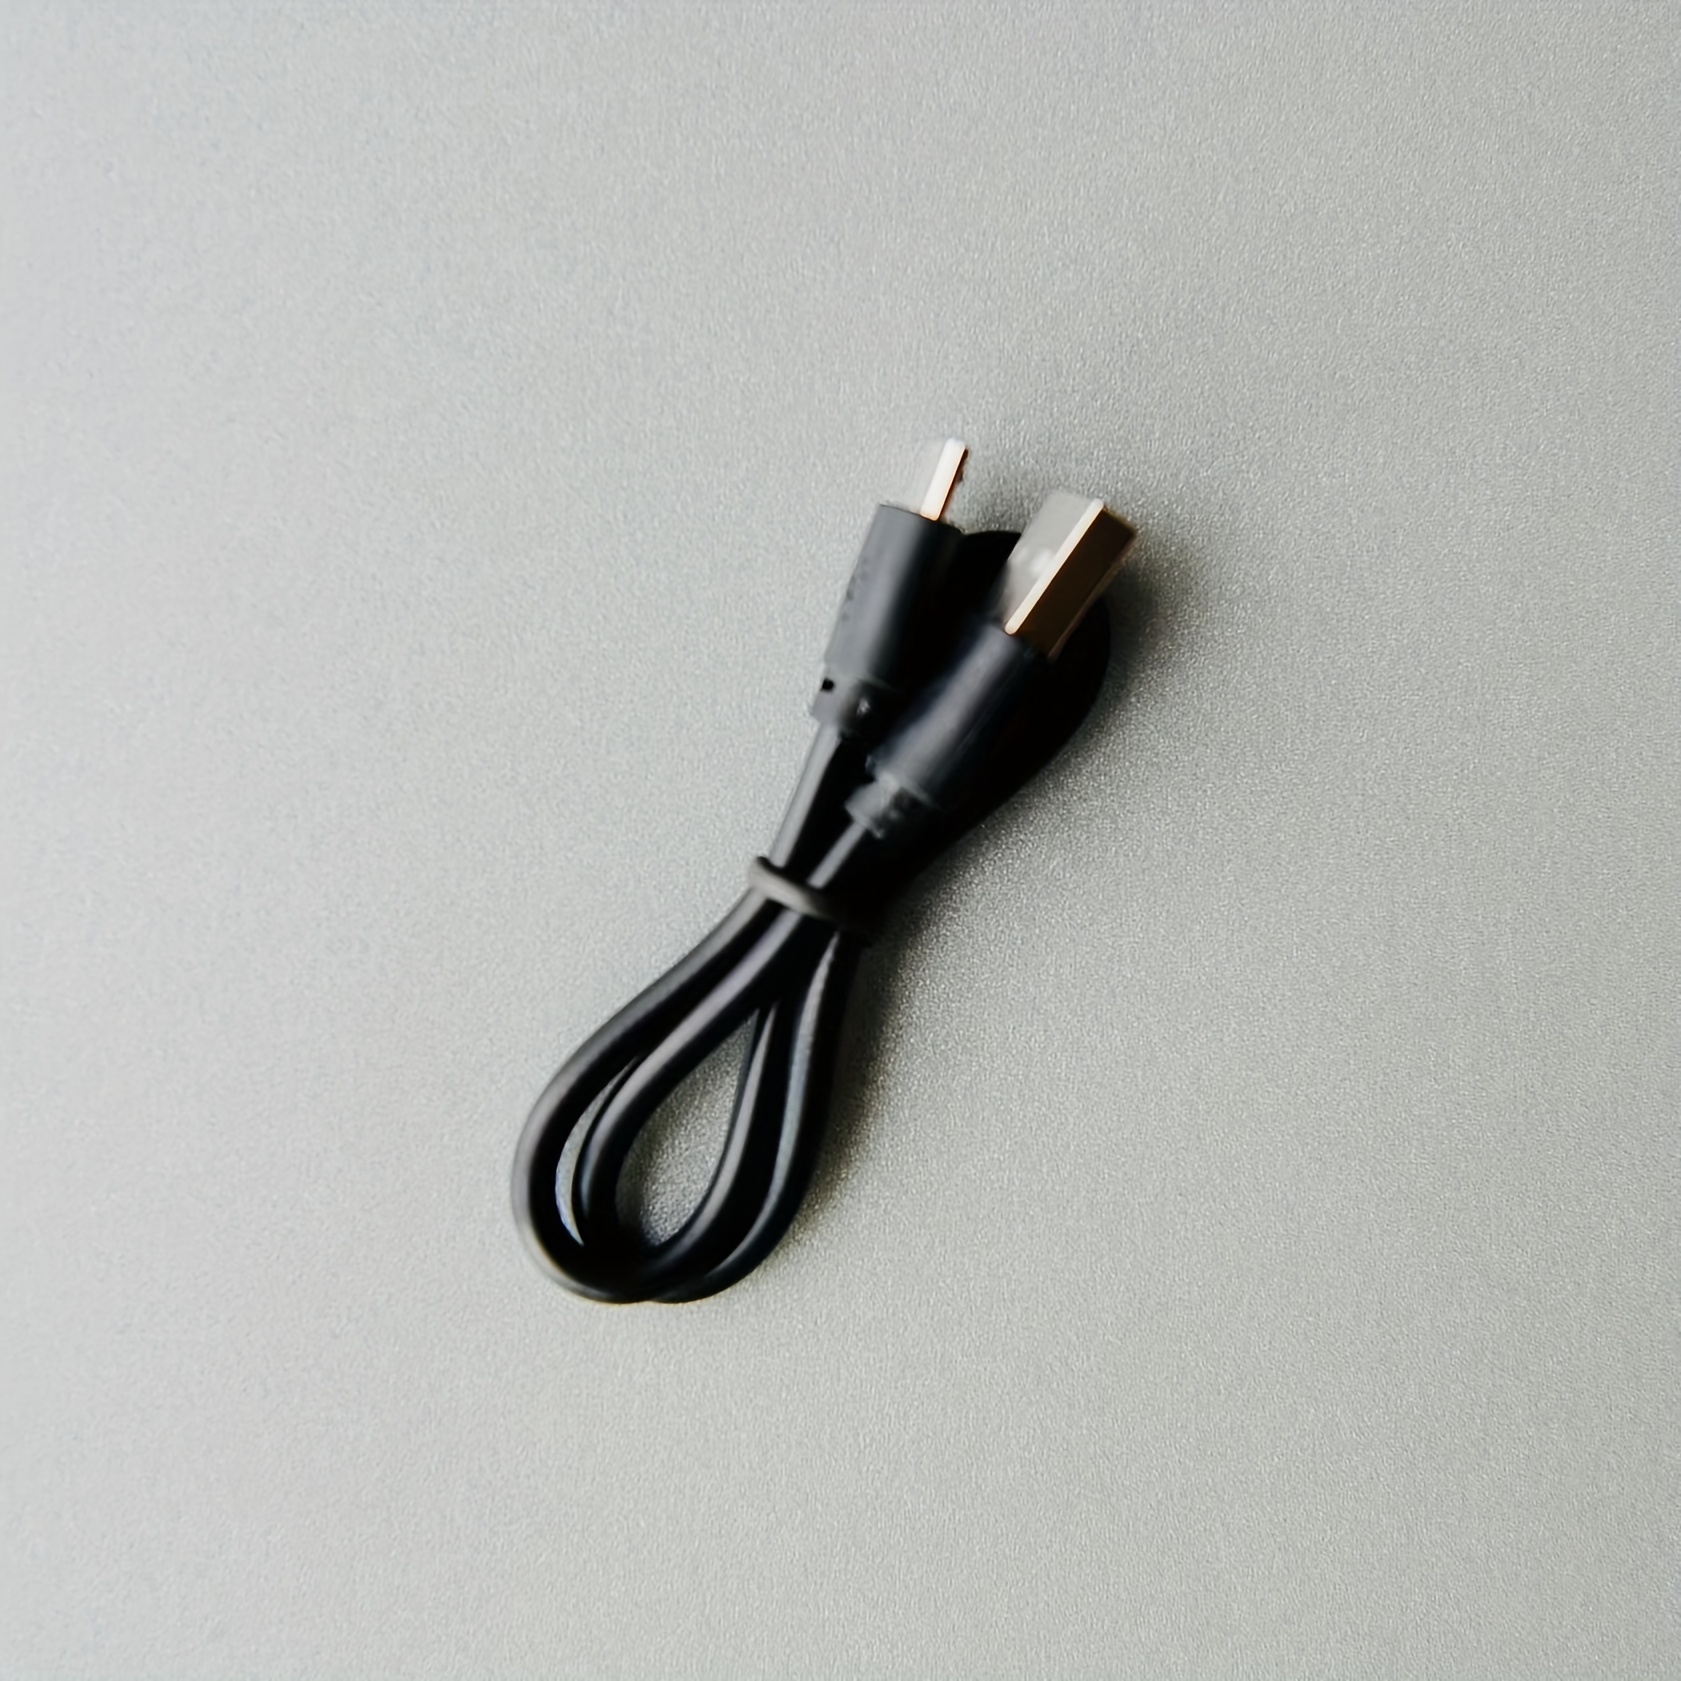 2a Usb Fast Charging Micro Cables For Android Phone Charger - Temu